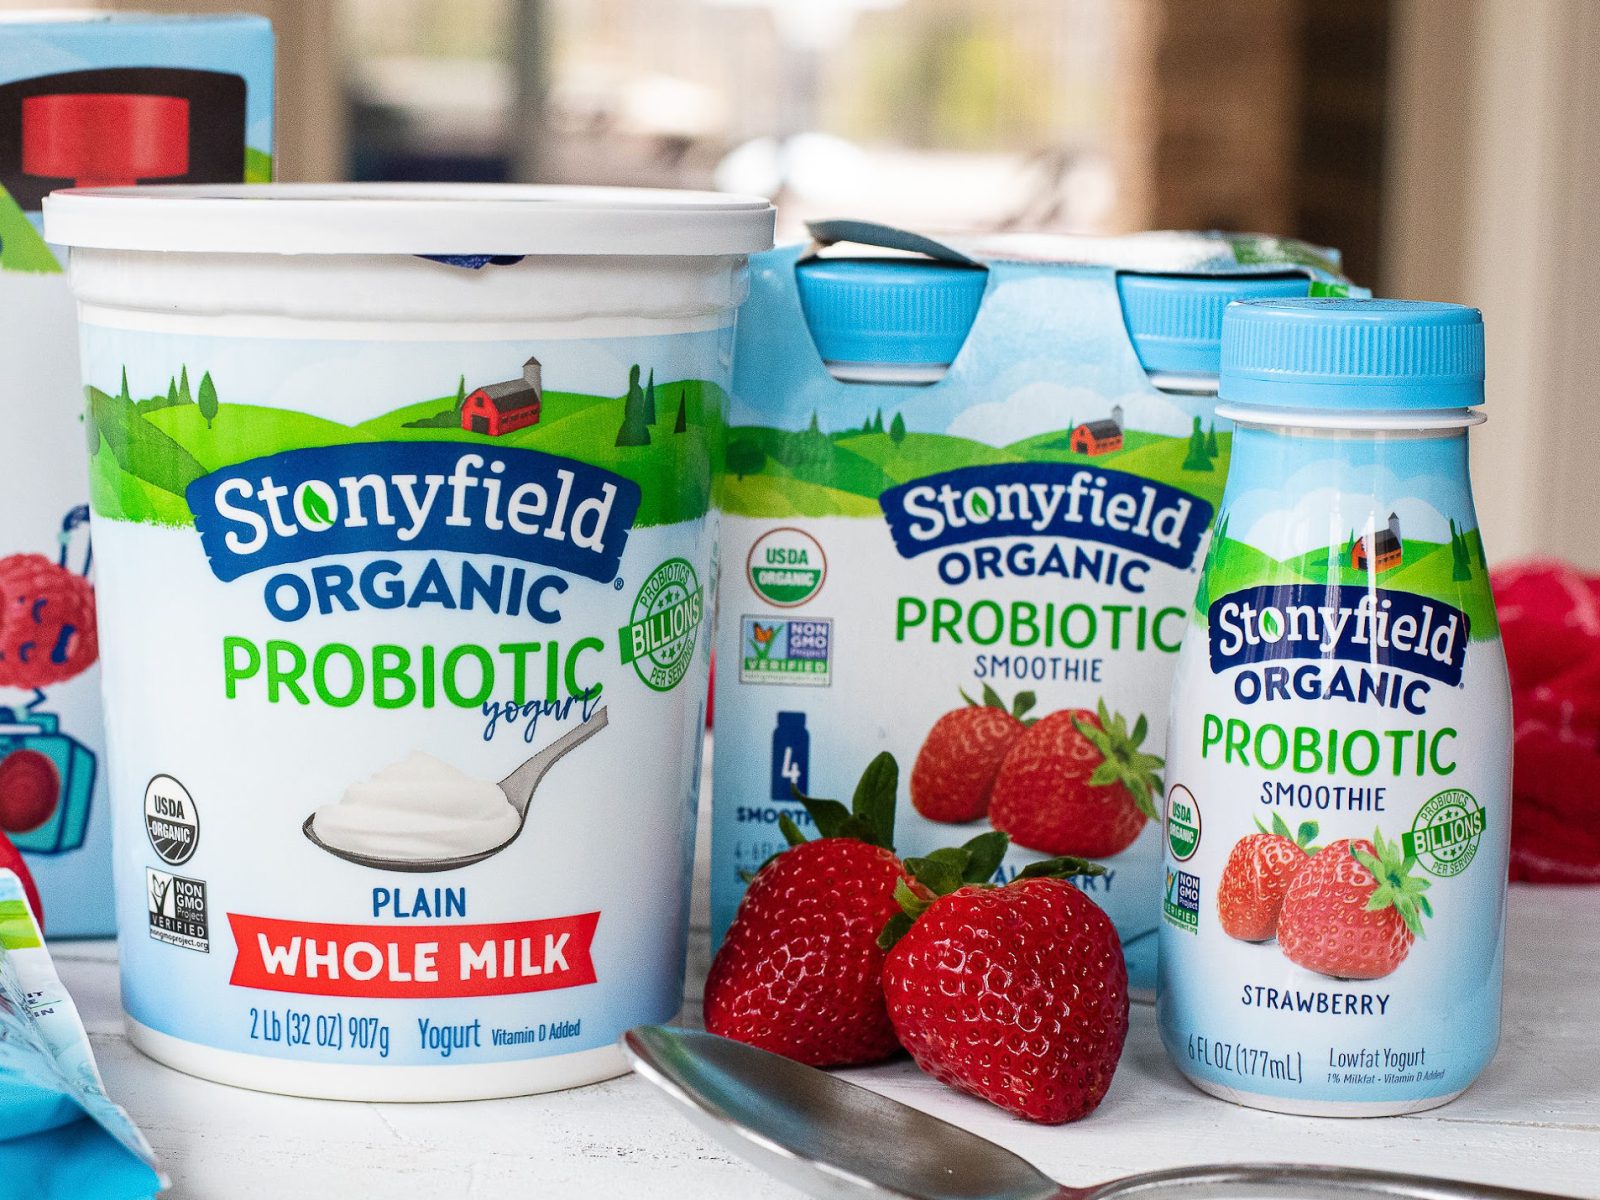 Your Favorite Stonyfield Organic Yogurt Products Are BOGO This Week At Publix